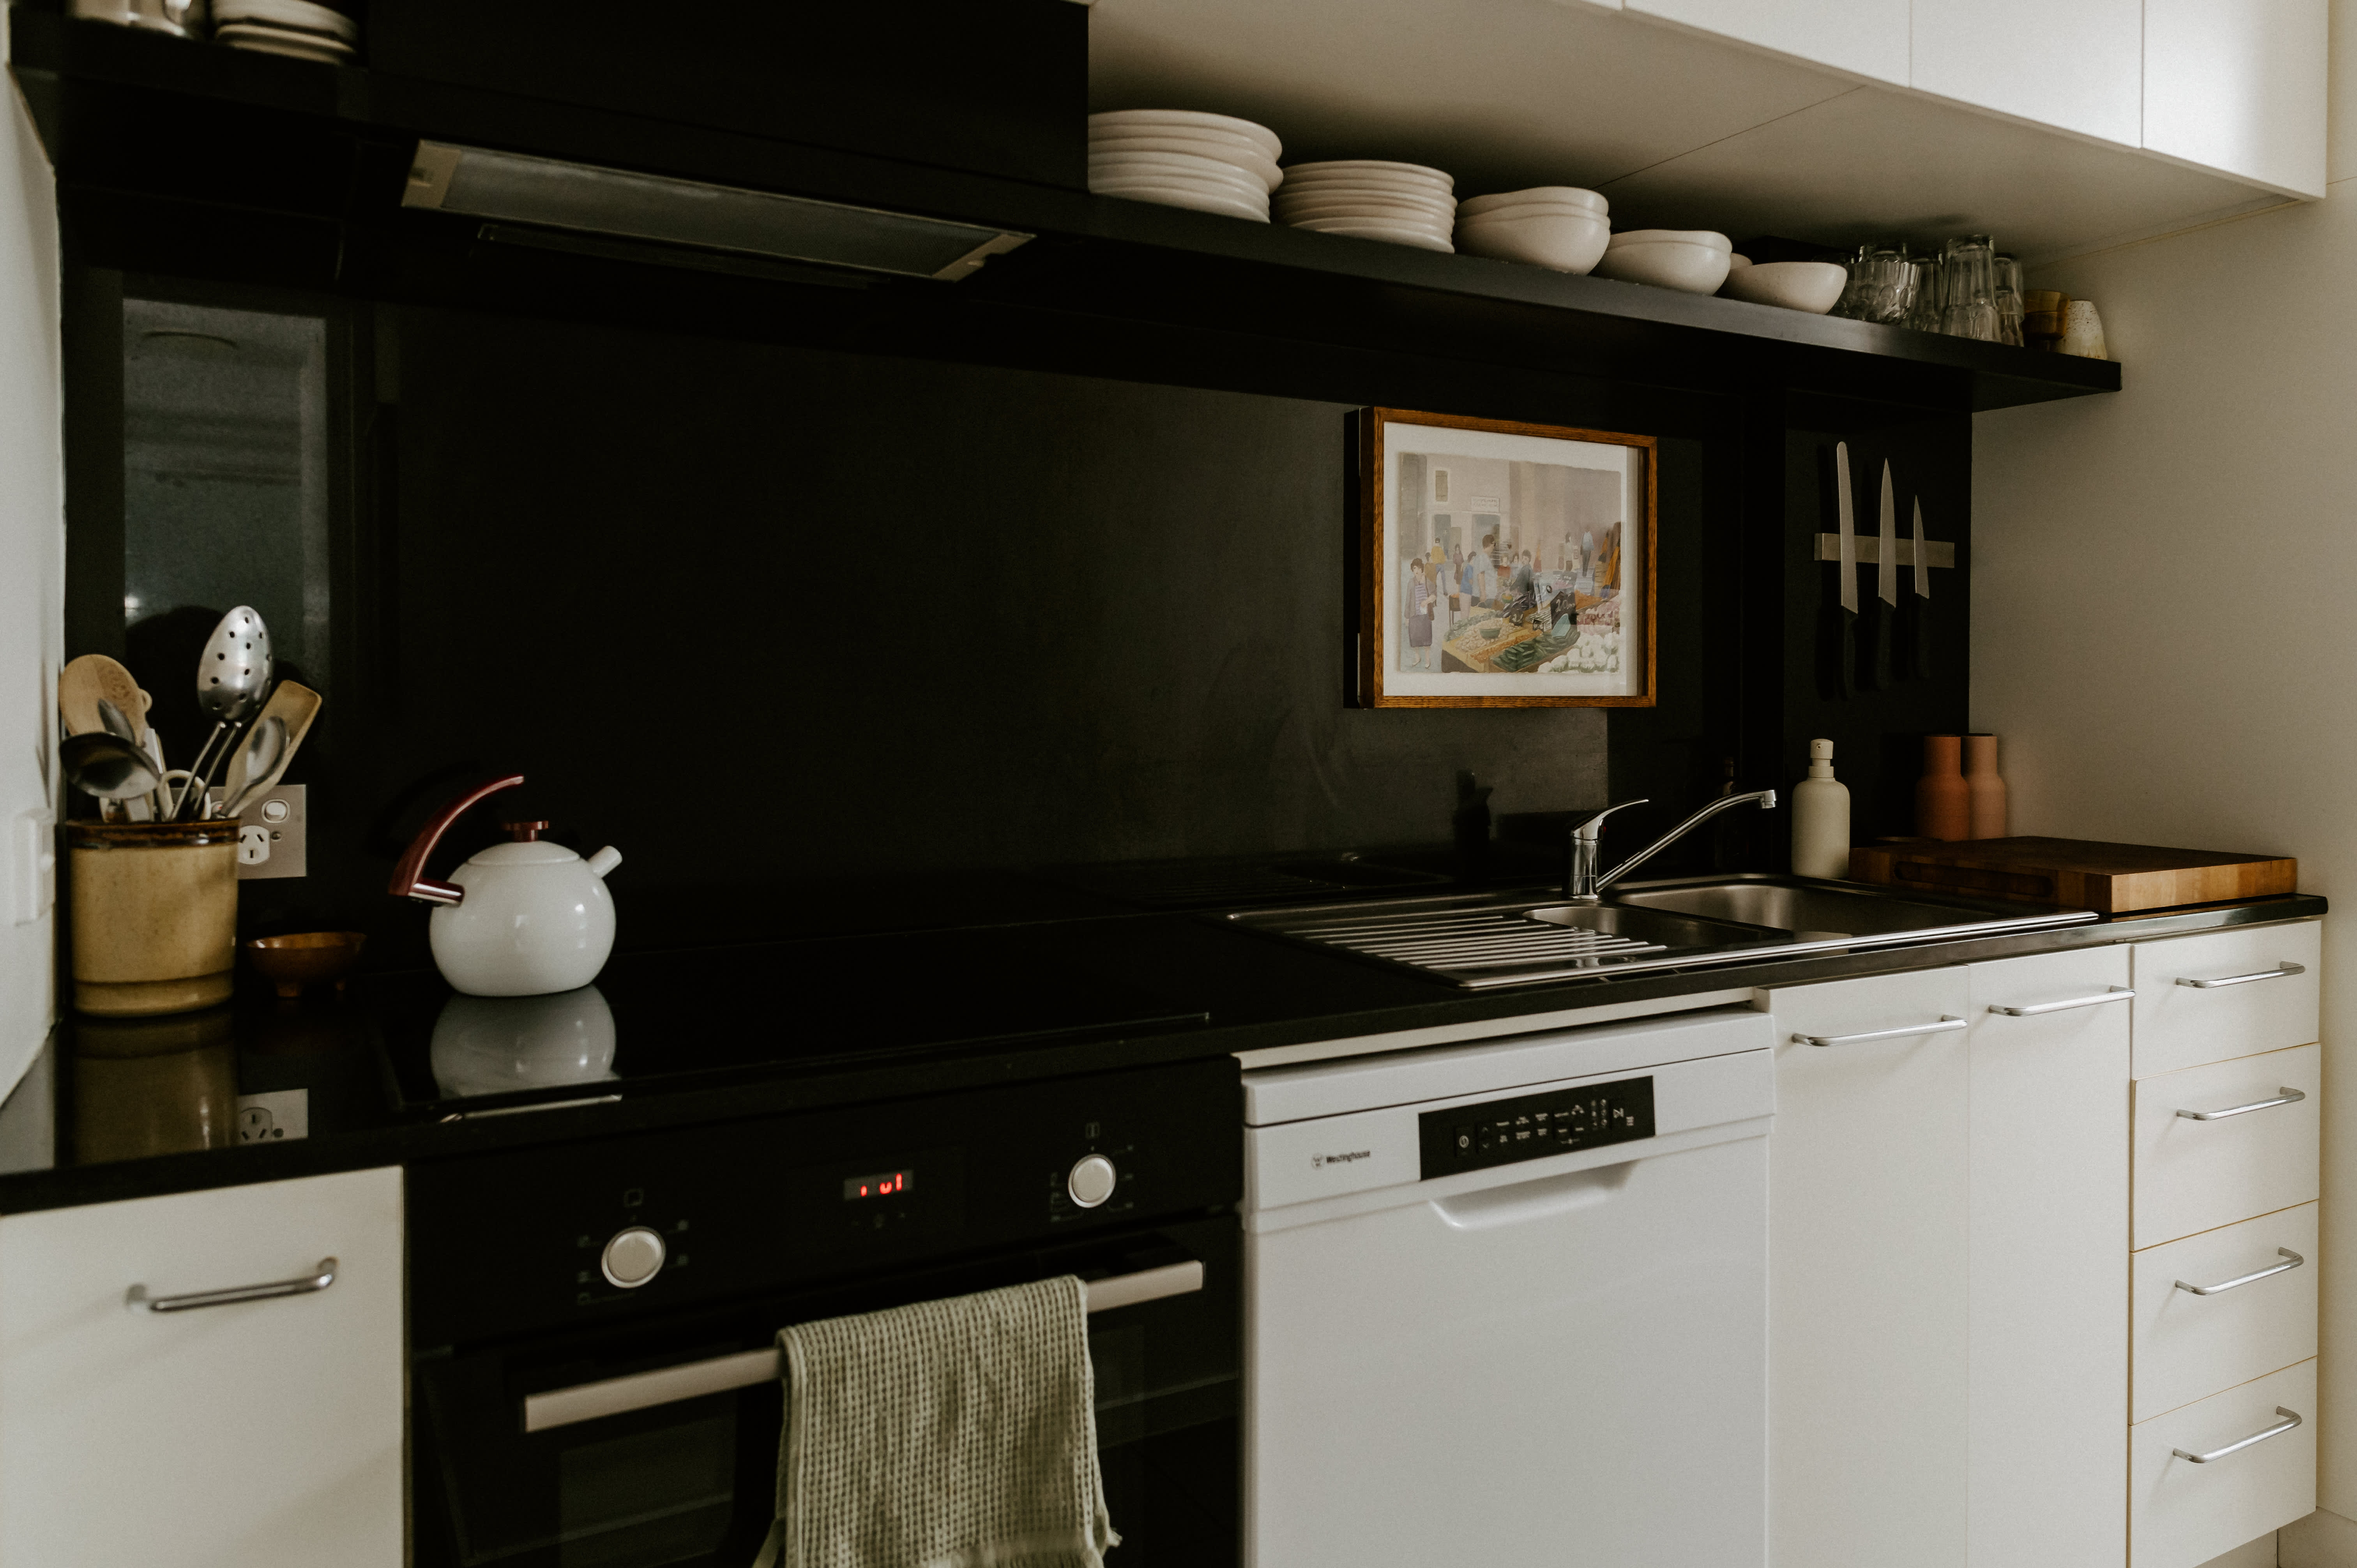 Best Small Kitchen Ideas for Apartment Living - Tiara L. Cole - Top Atlanta  Fashion and Home Decor Blog